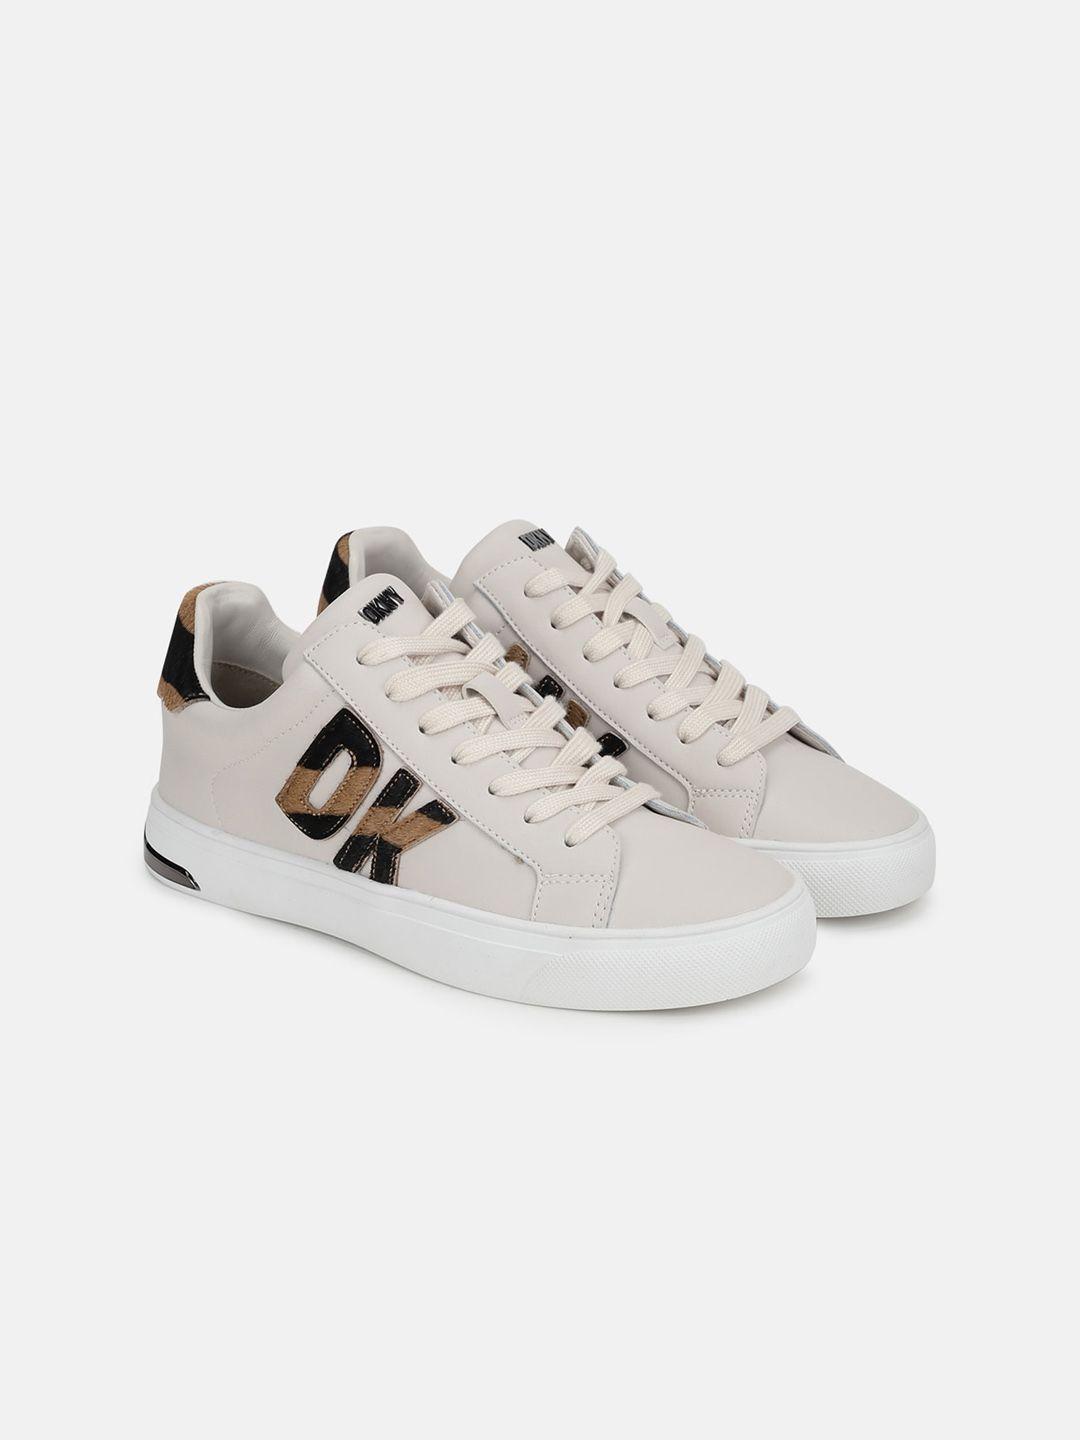 dkny women round toe leather sneakers